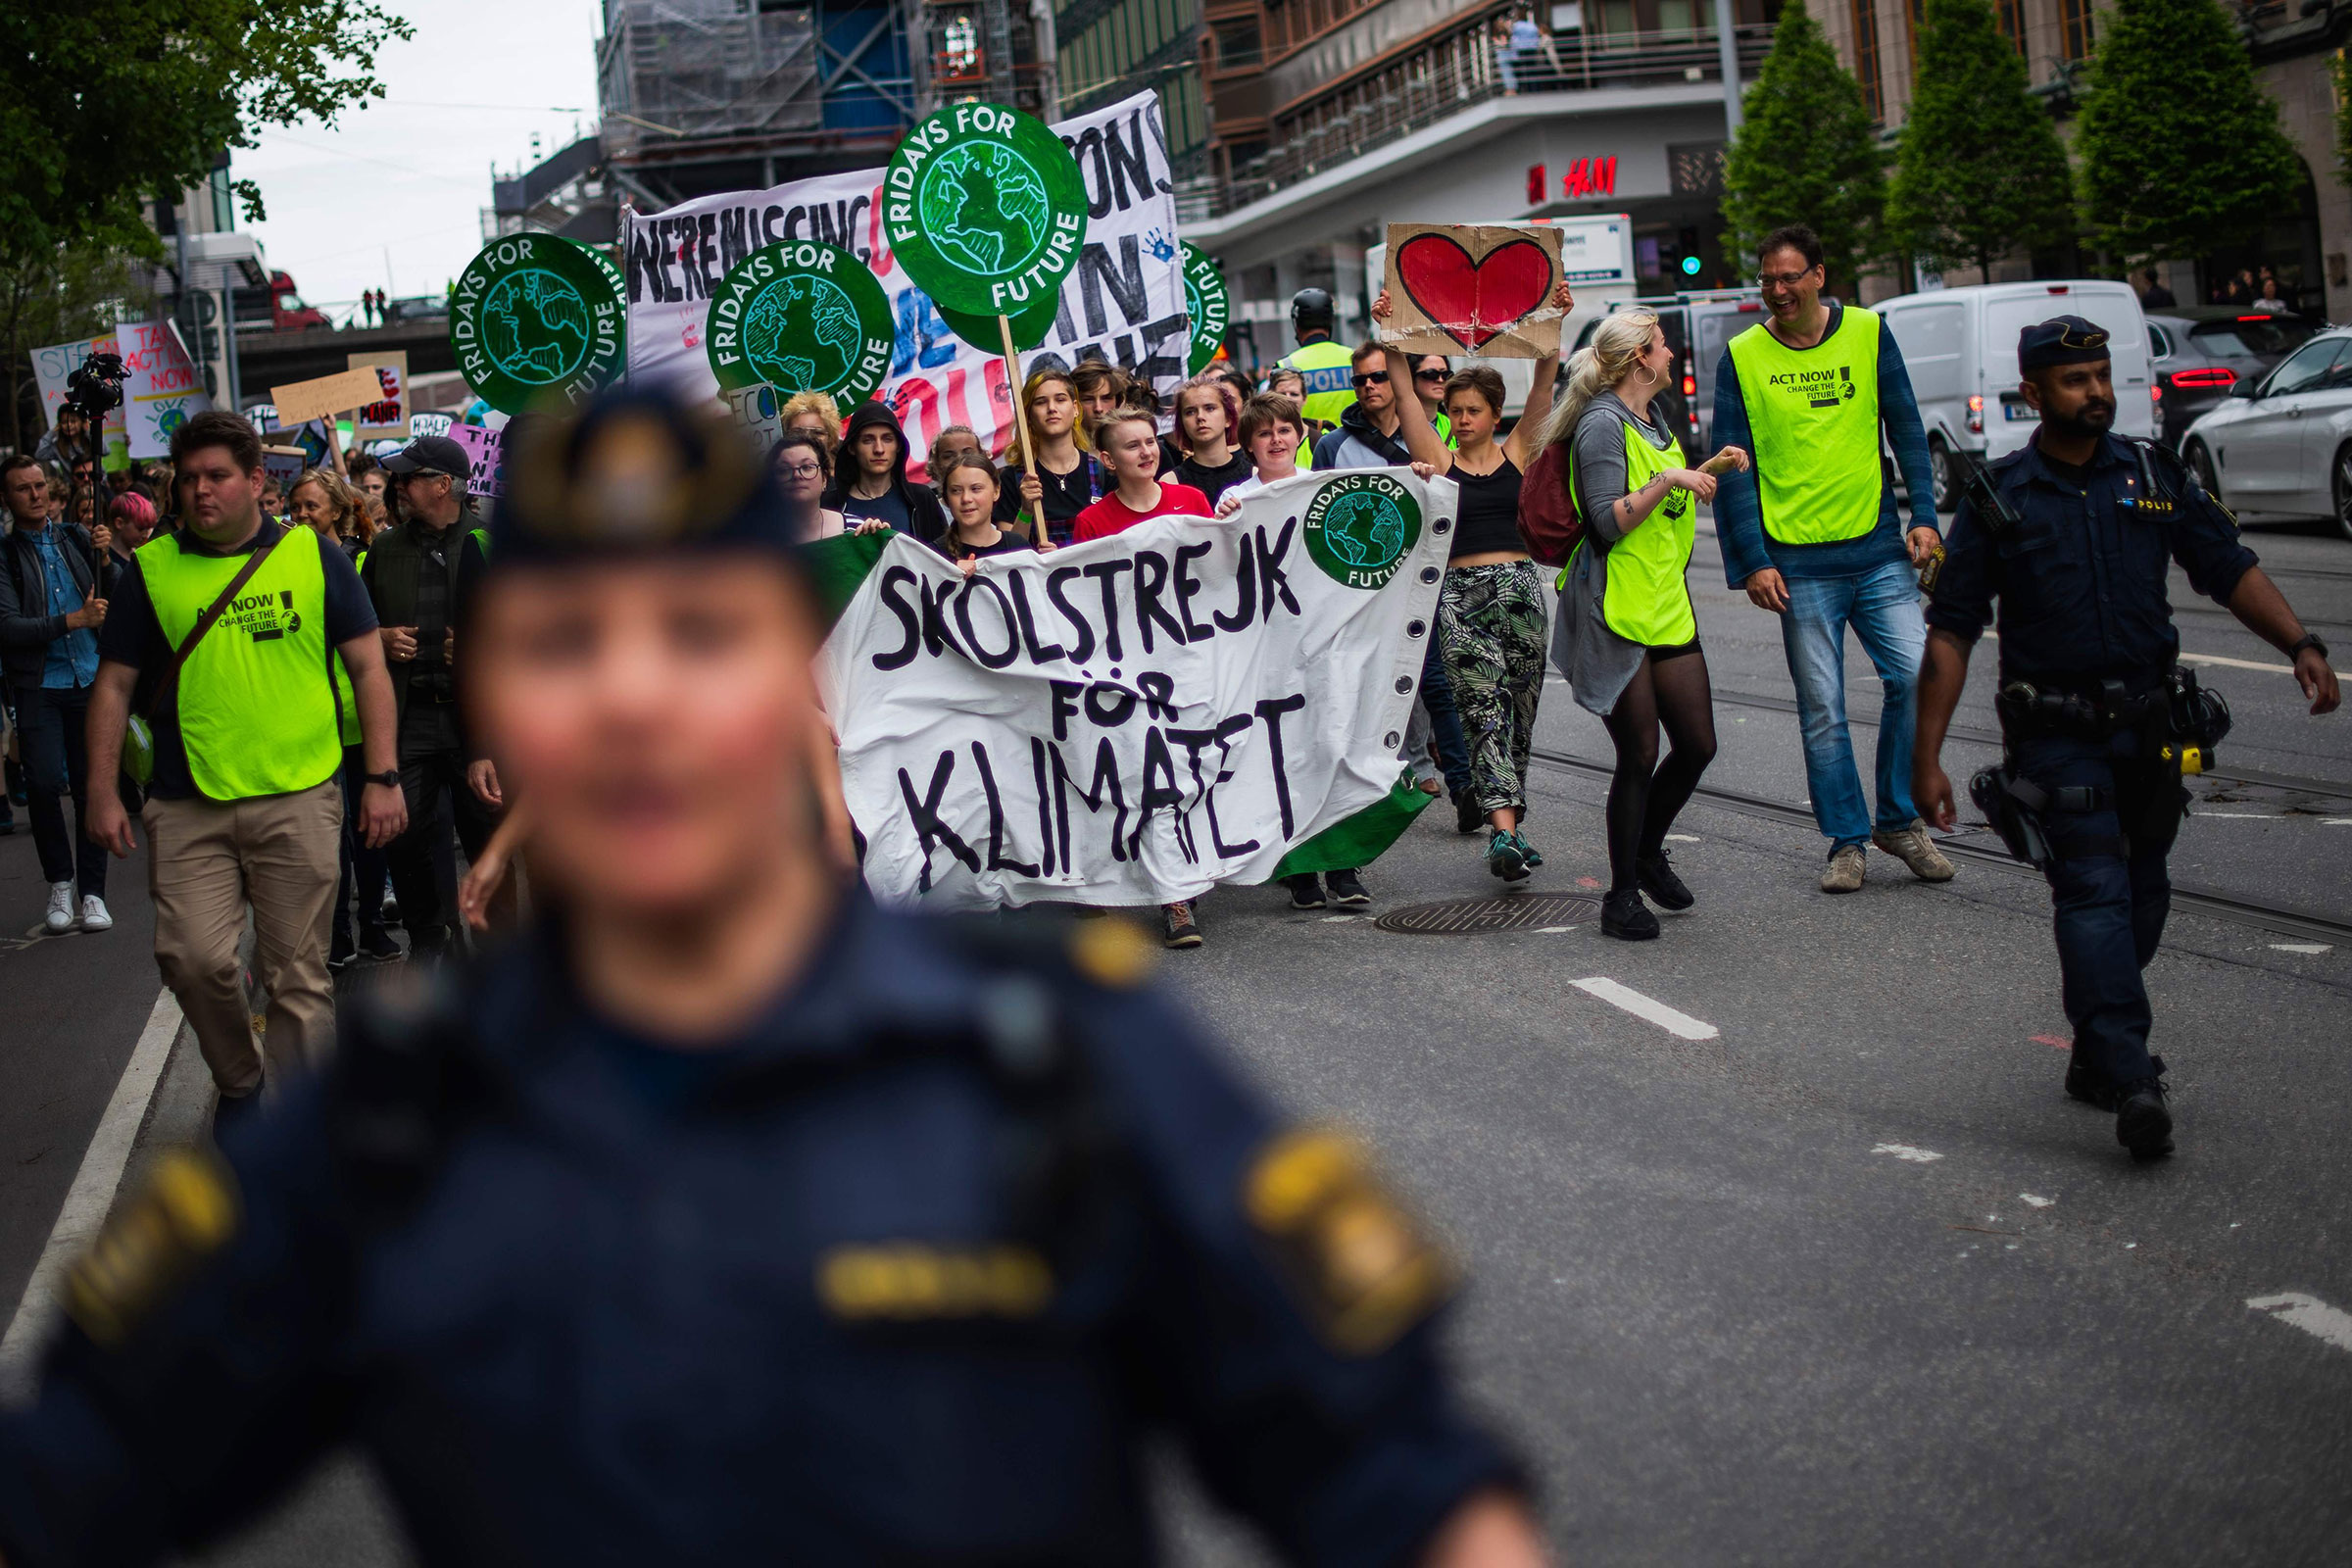 Greta Thunberg (2ndL behind the banner), the 16-year-old Swedish climate activist, marches during the "Global Strike For Future" movement